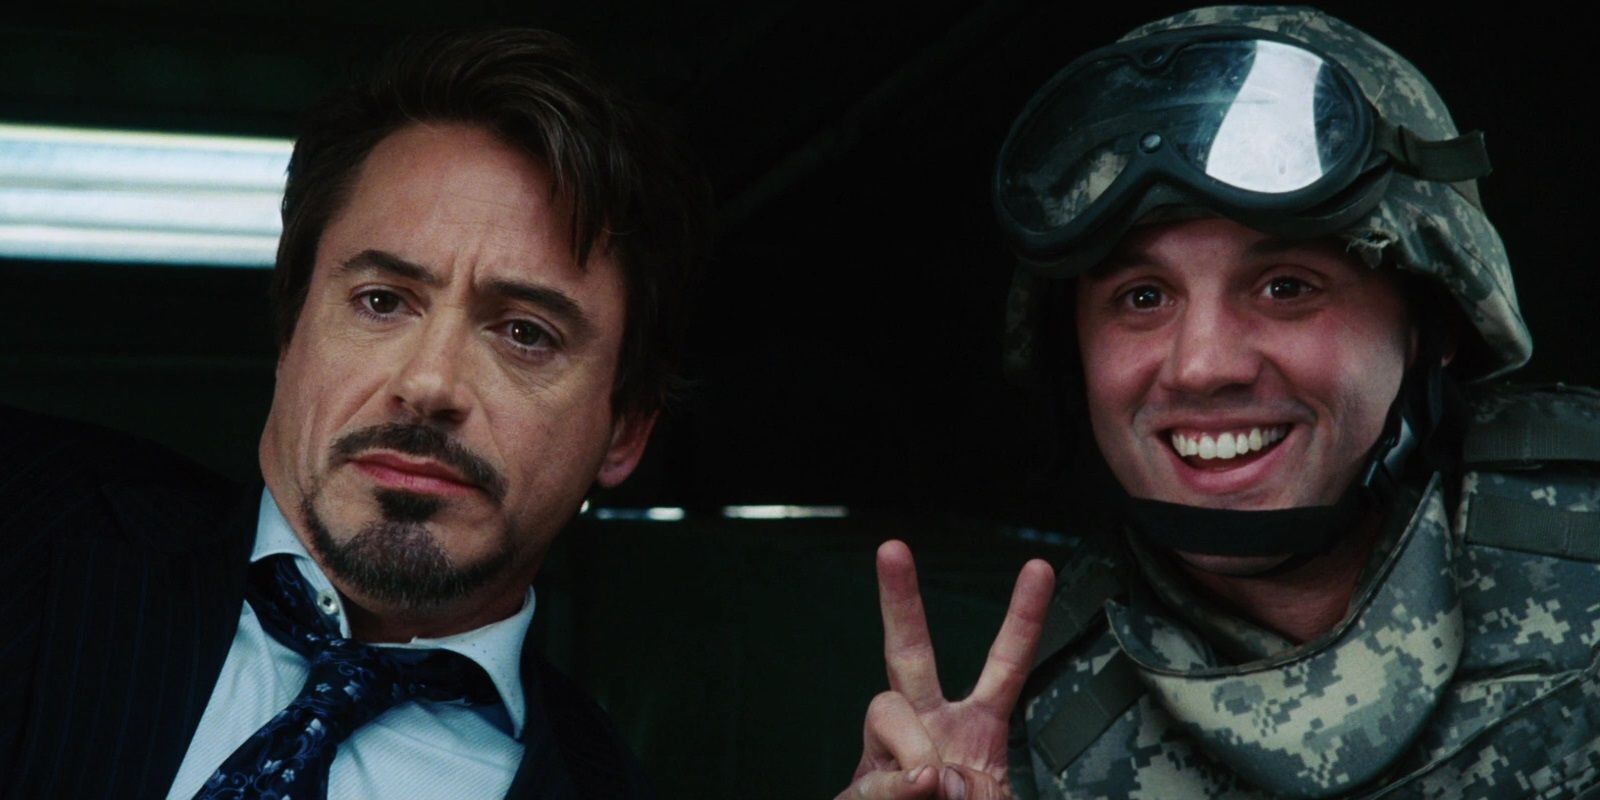 Tony takes a photo with a soldier in Iron Man